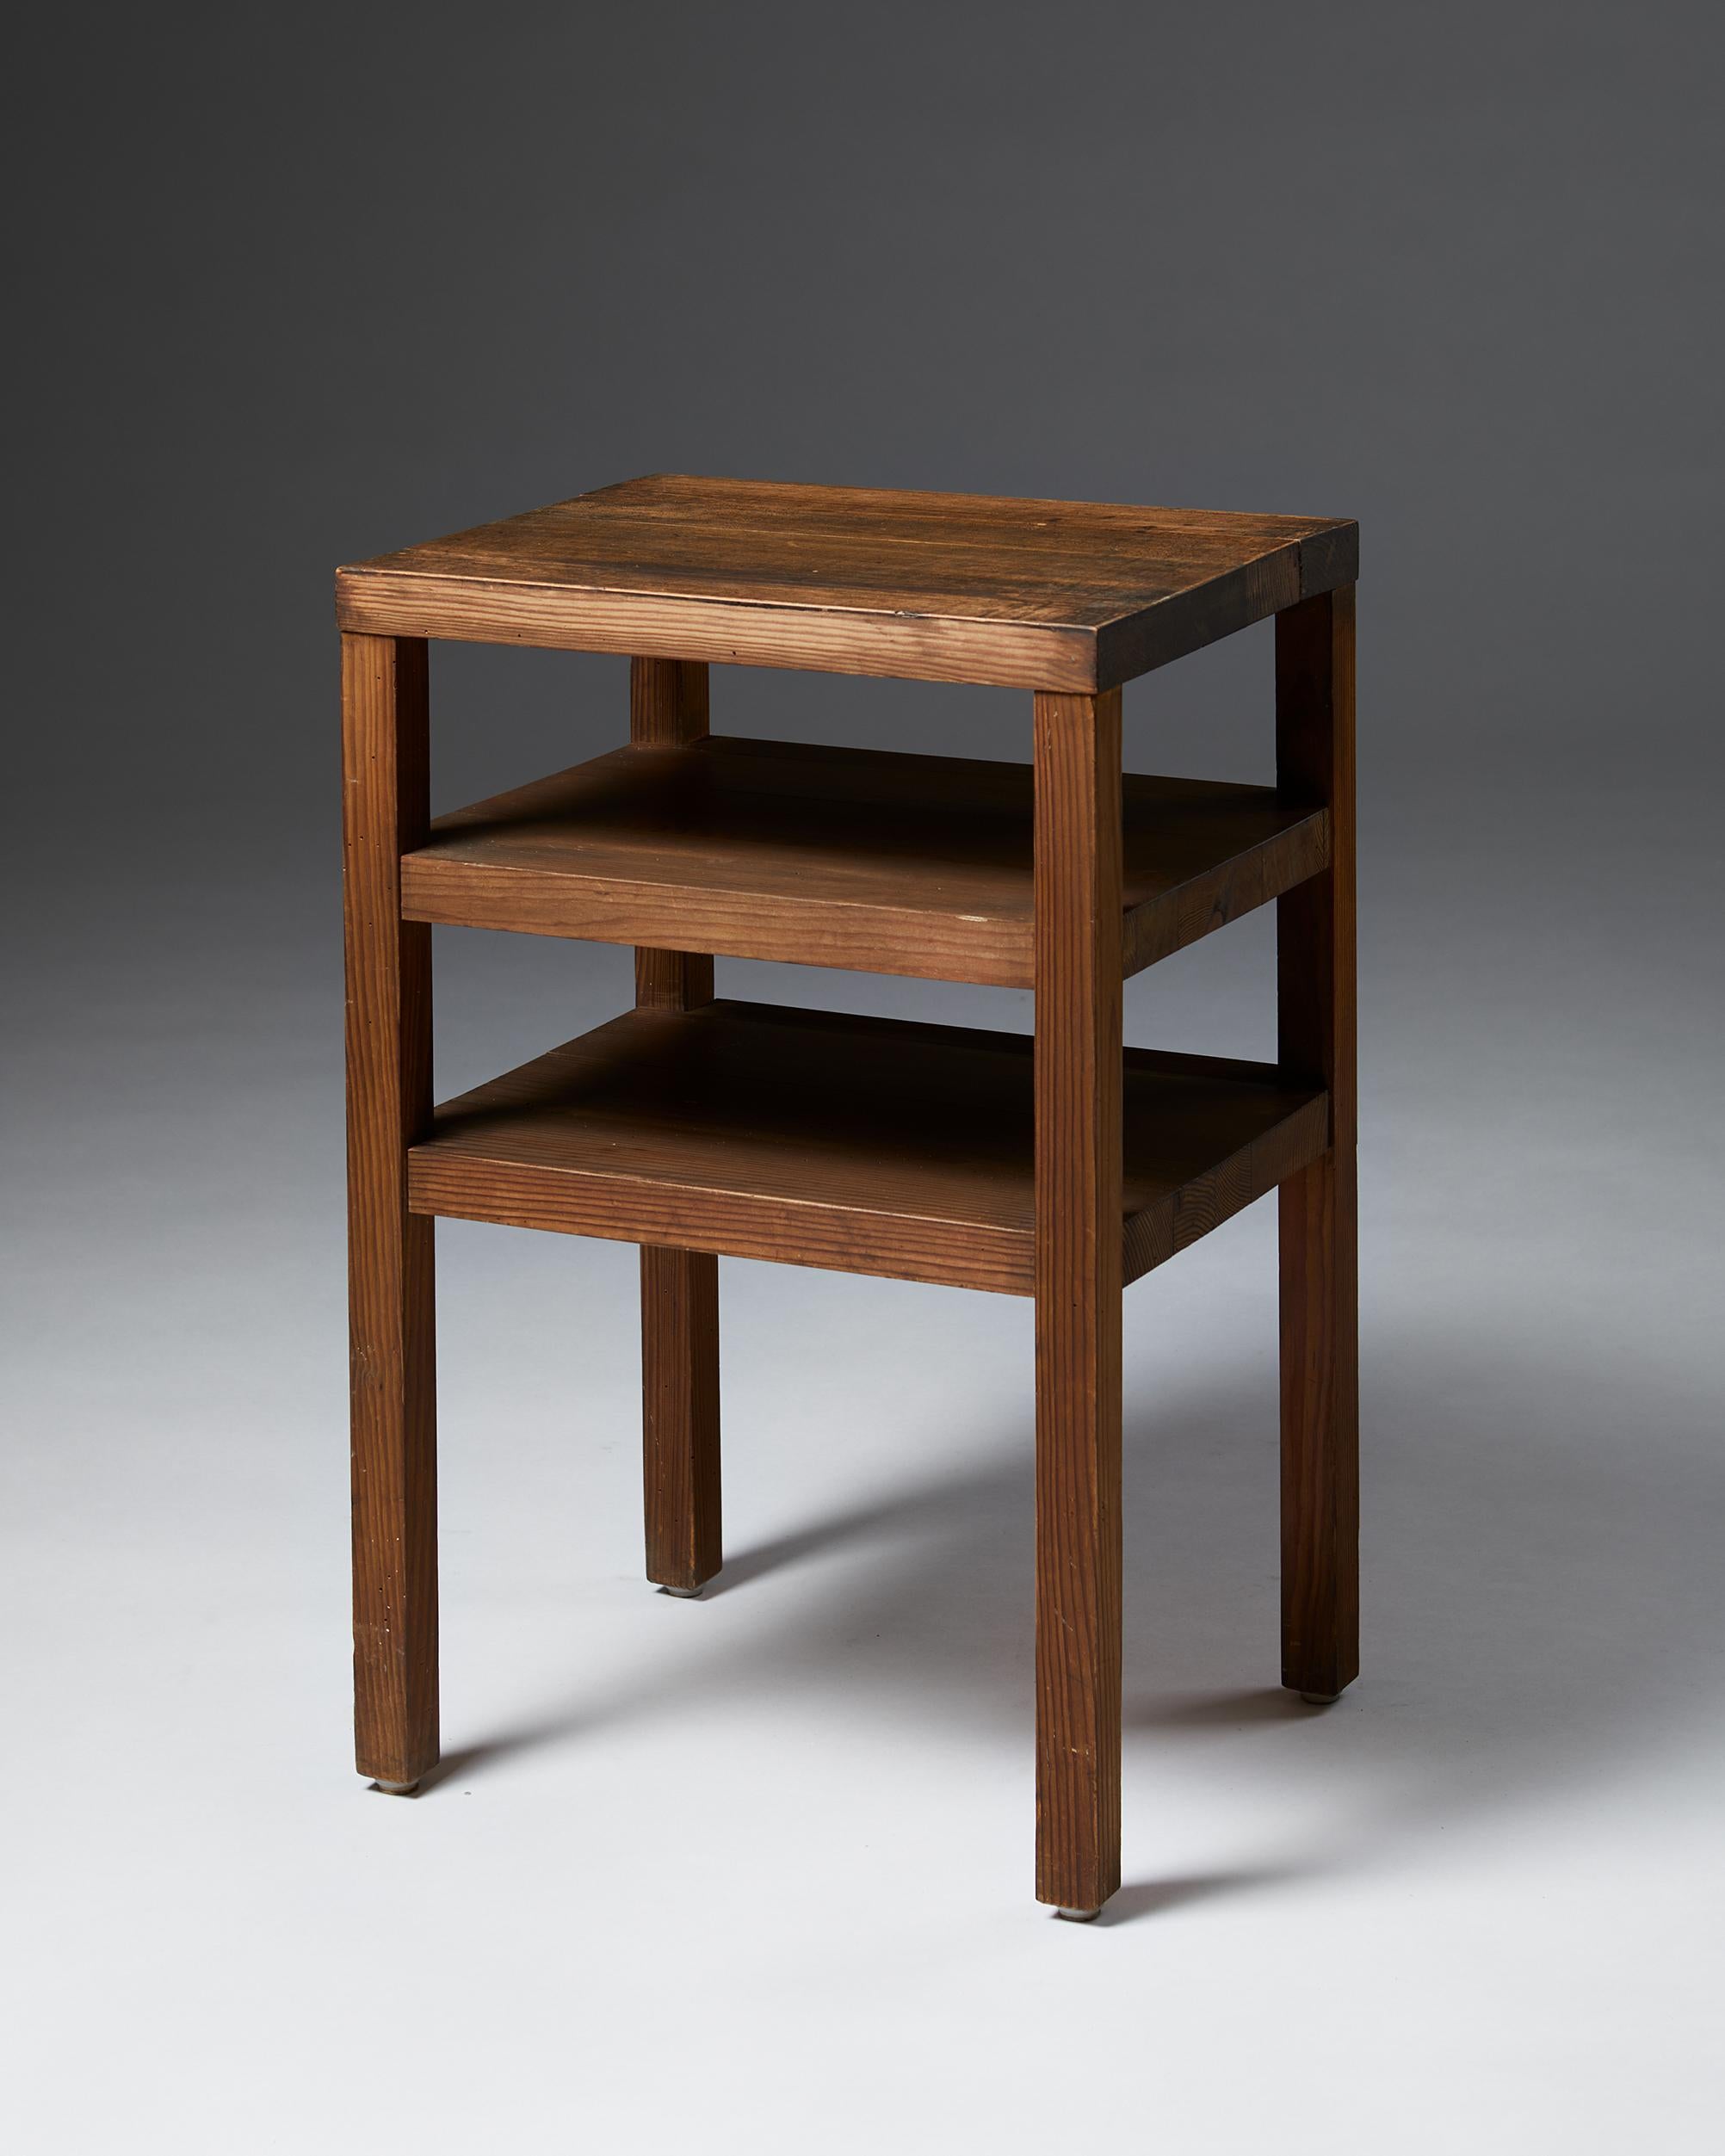 Side table ‘Sport’ designed by Axel Einar Hjorth for Nordiska Kompaniet,
Sweden, 1930s.
Stained pine.

Marked 37113.

Measures: H 61 cm/ 2'
W 40 cm/ 15 3/4